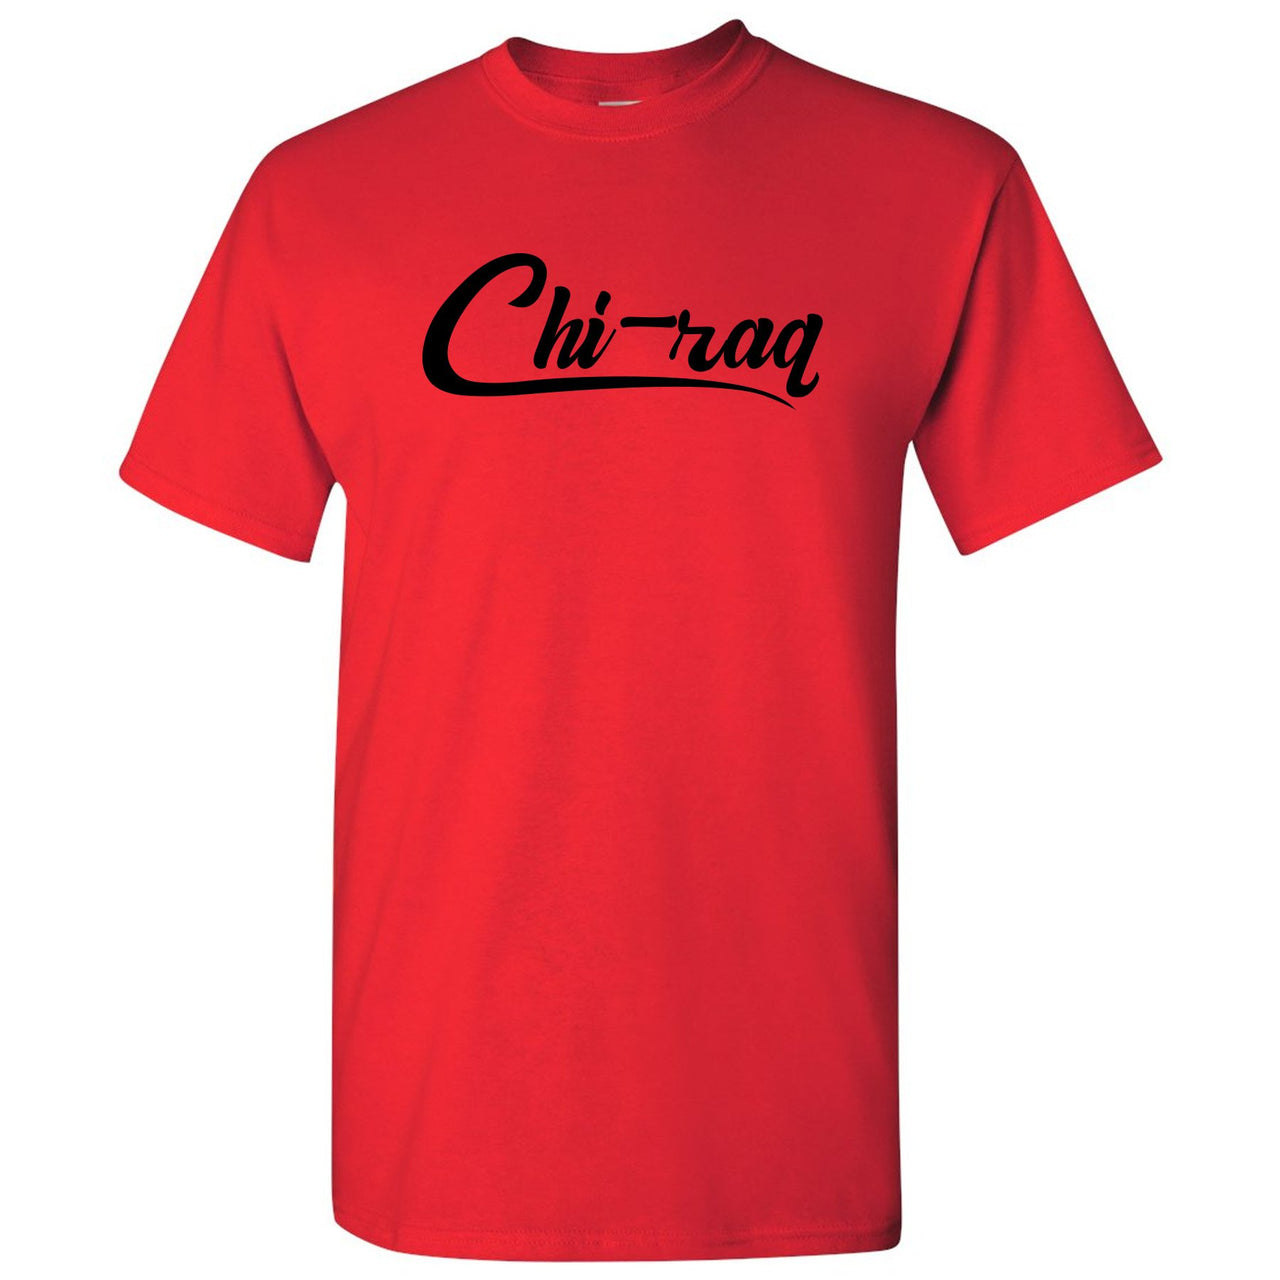 Reflections of a Champion 8s T Shirt | Chiraq Script, Red